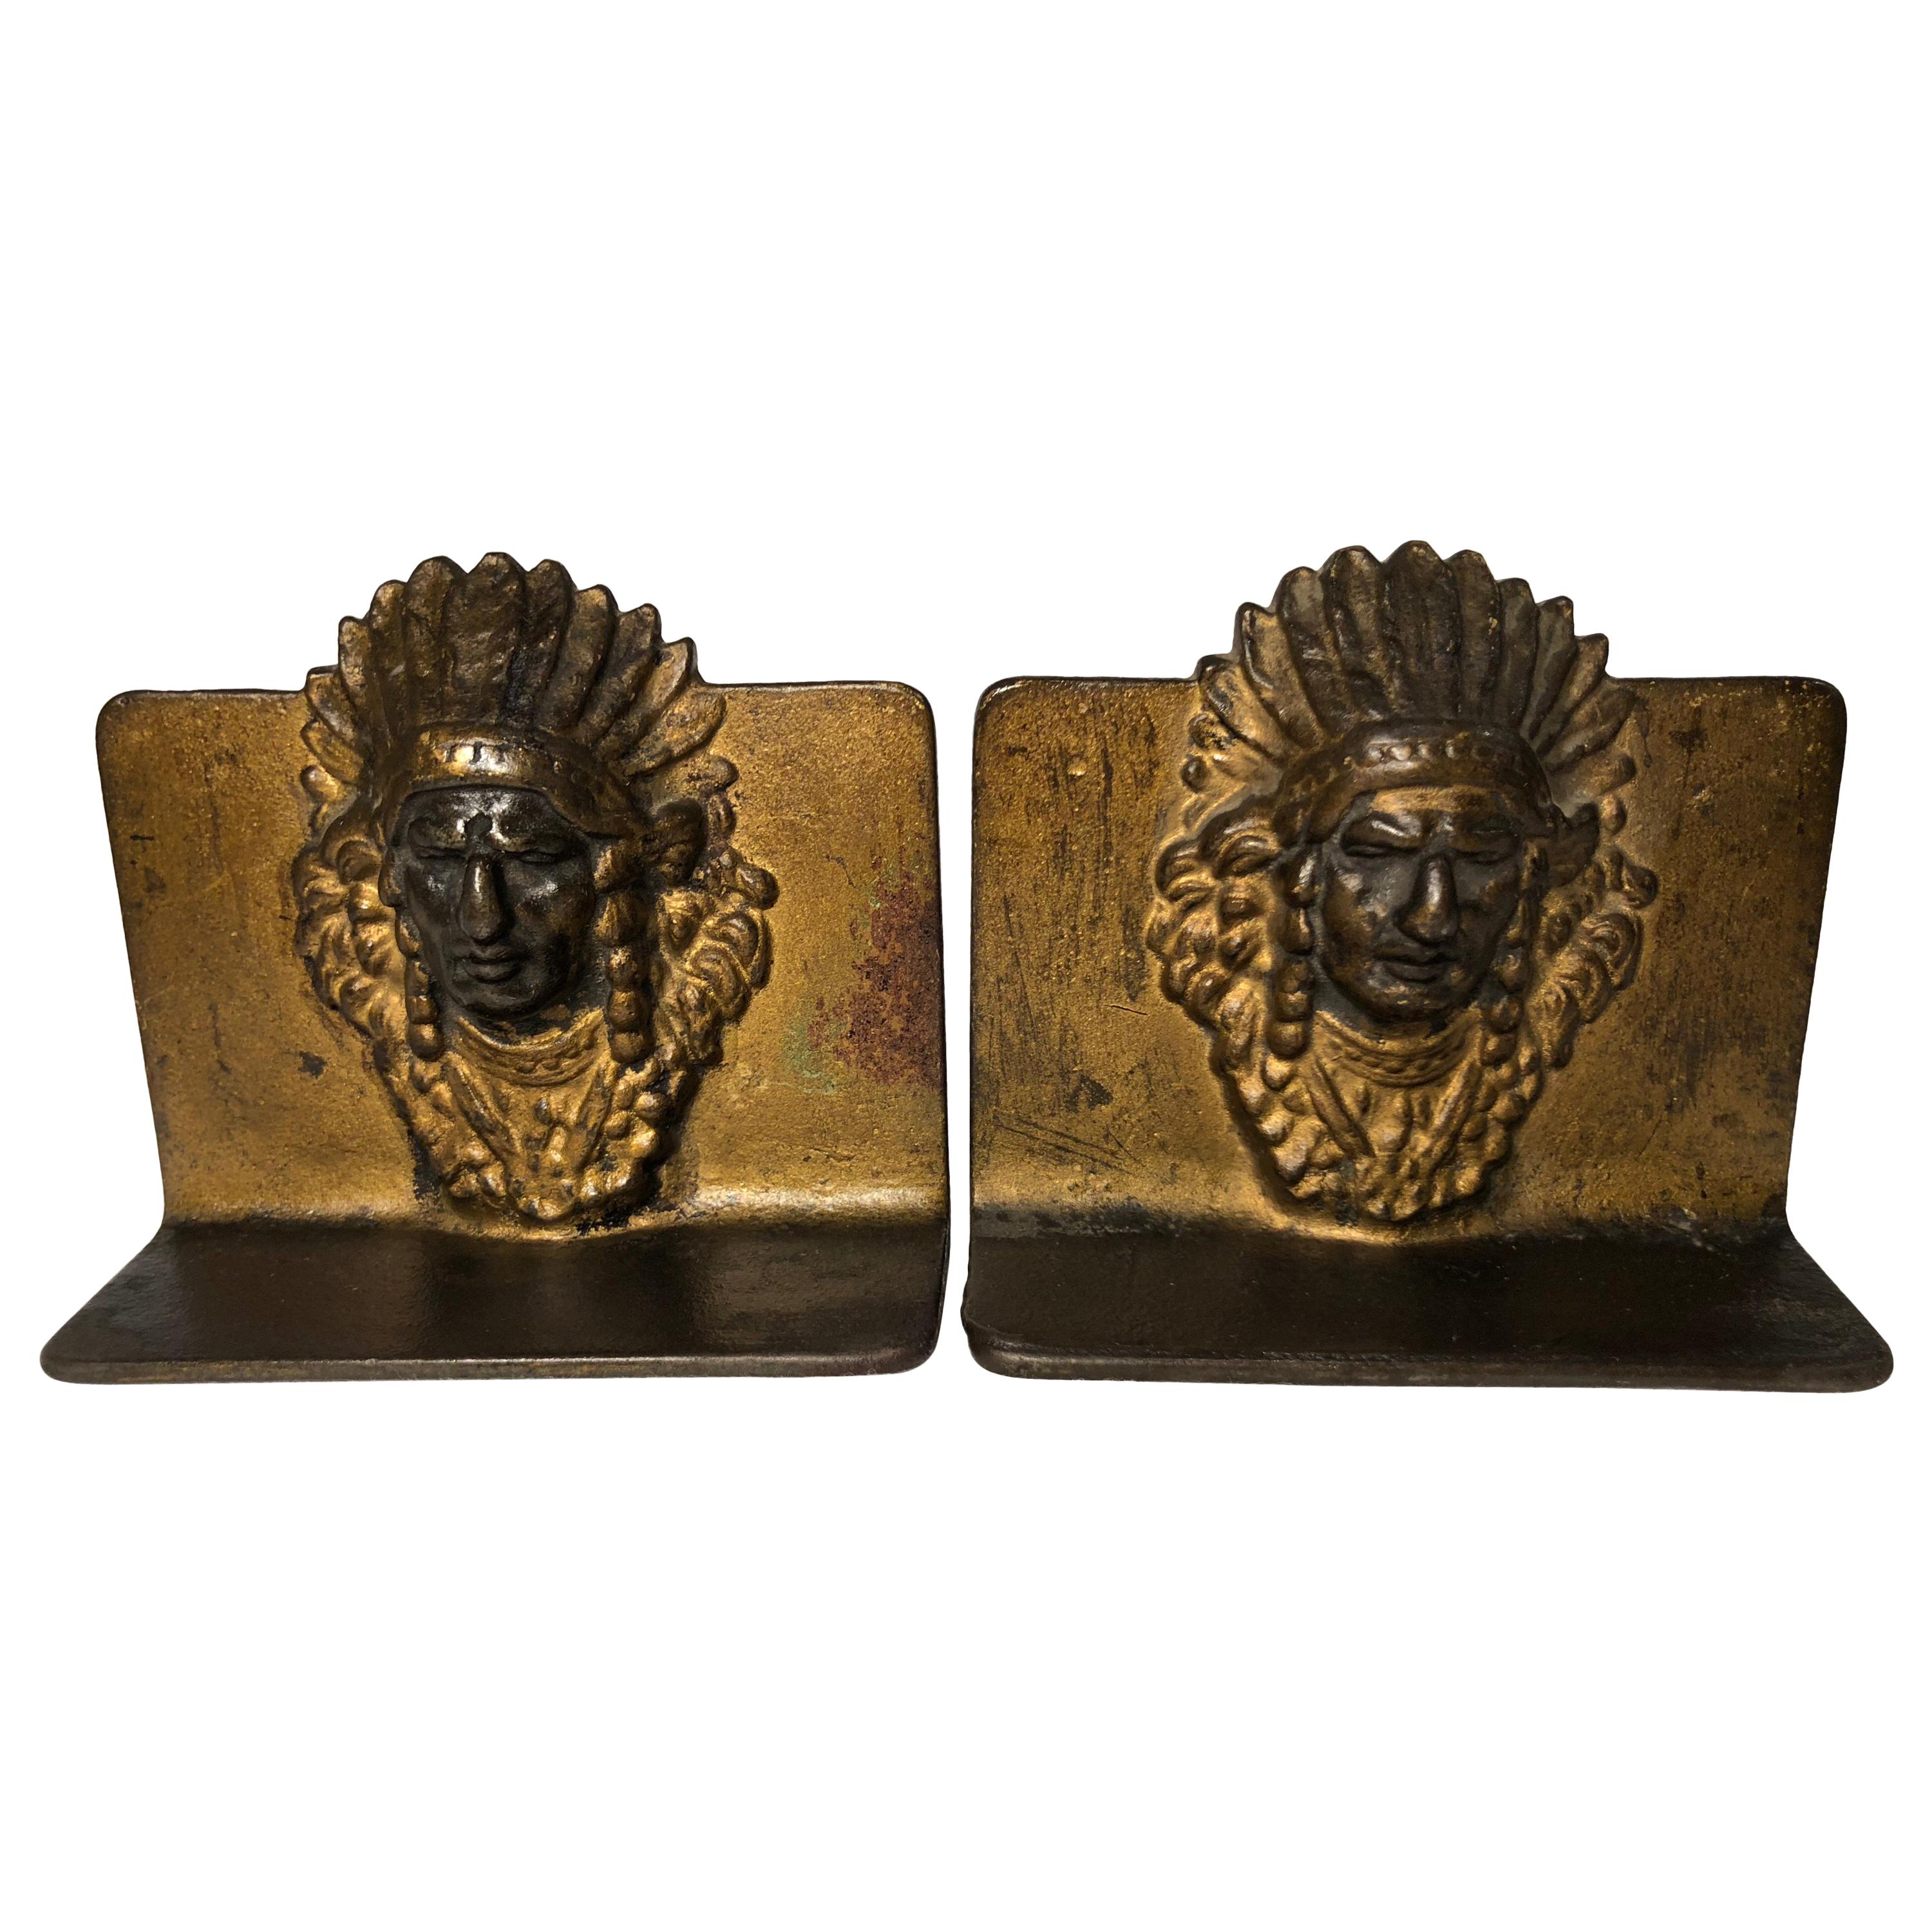 Pair of Indian Bookends